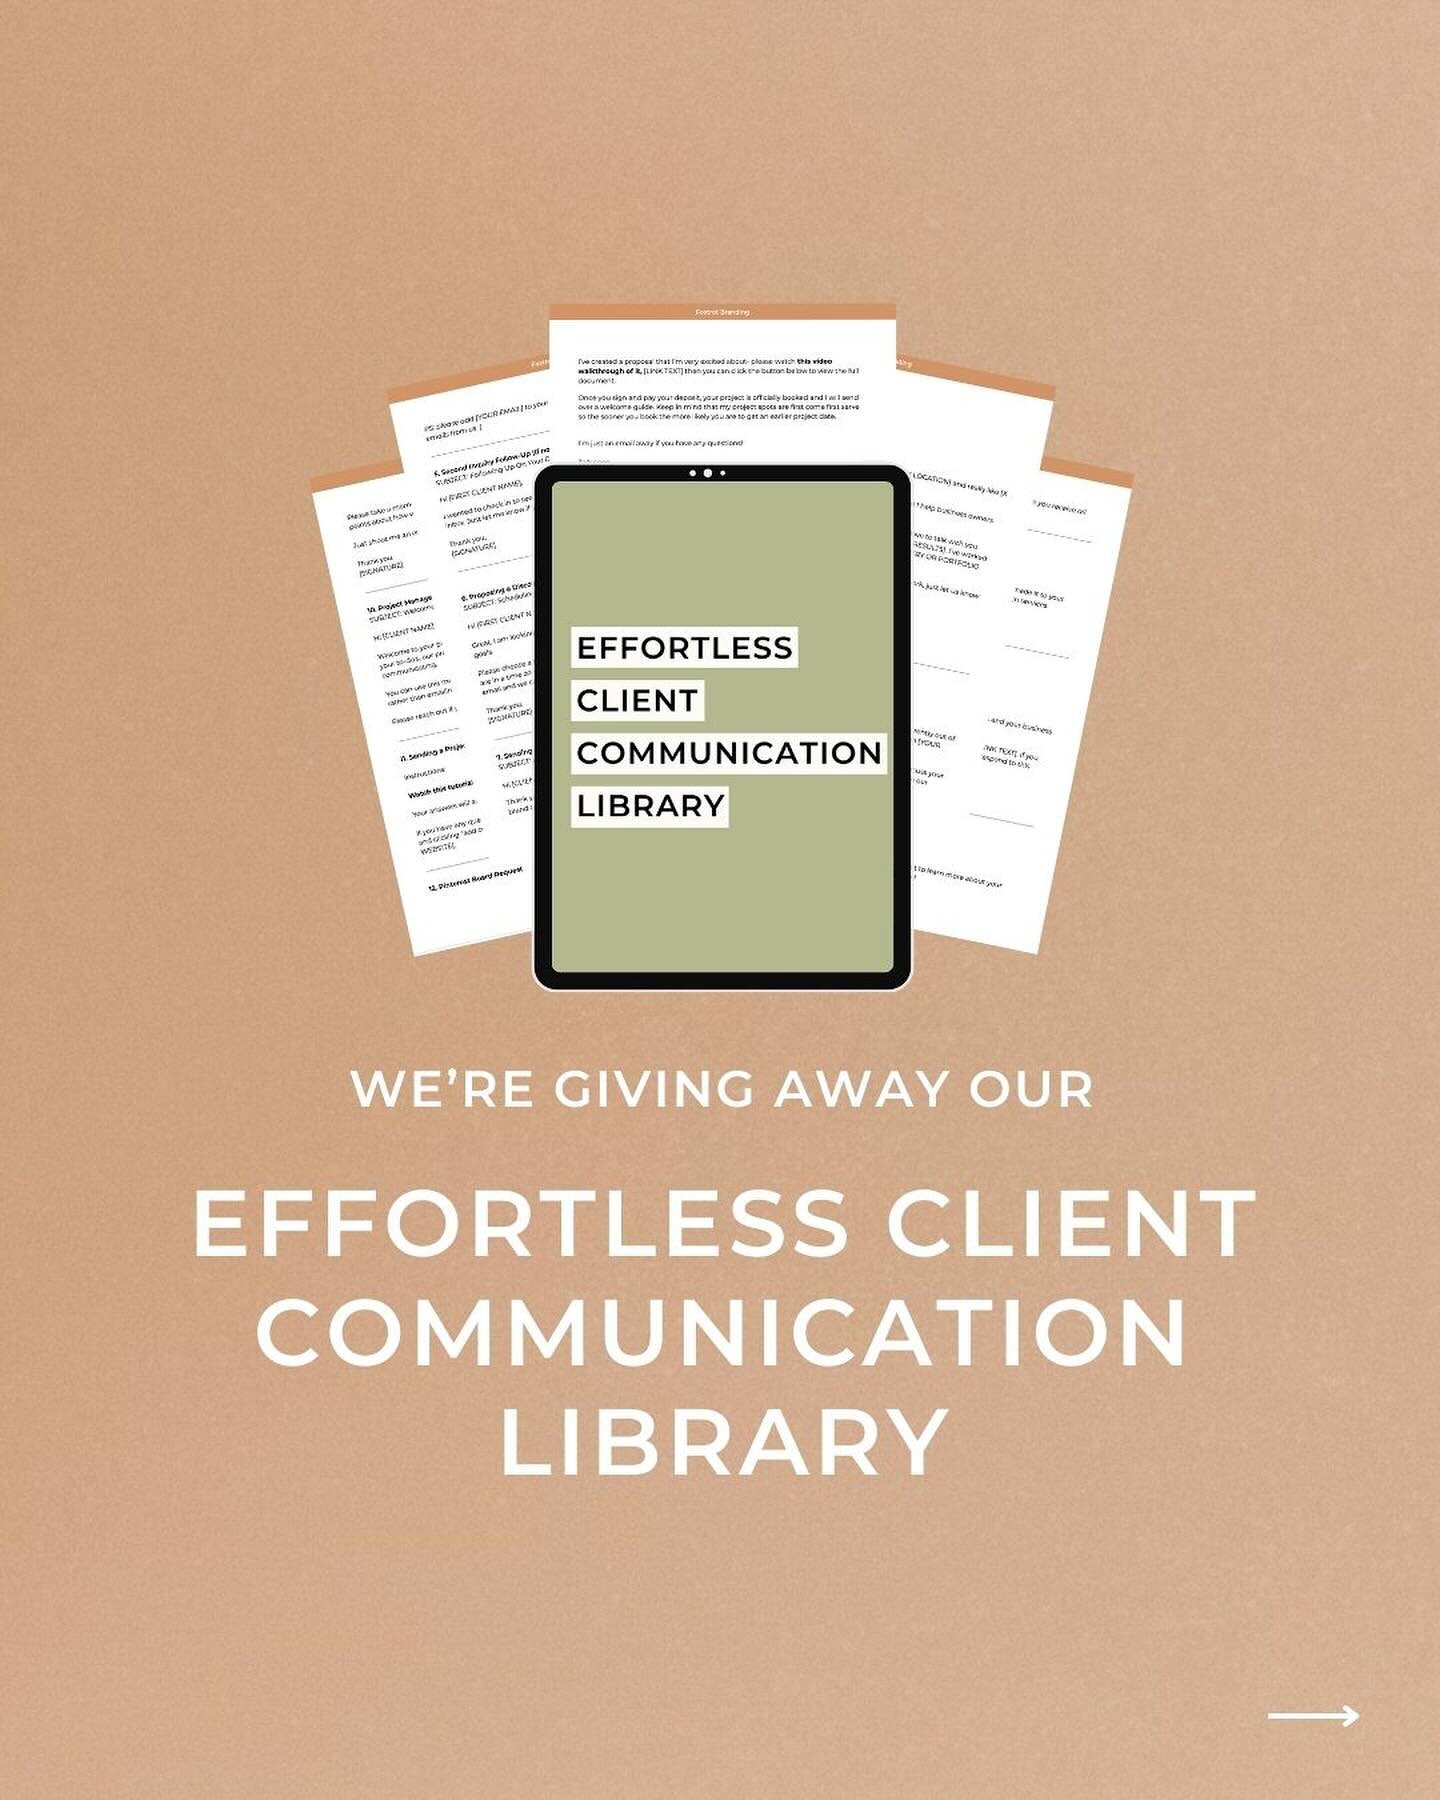 Client communication doesn&rsquo;t have to be hard, or tiring, or tedious.

It can be easy, streamlined, personable, and professional!

The easiest way to achieve effortless client communication? 🤔

With 📝pre-written email/message templates that ⏰s